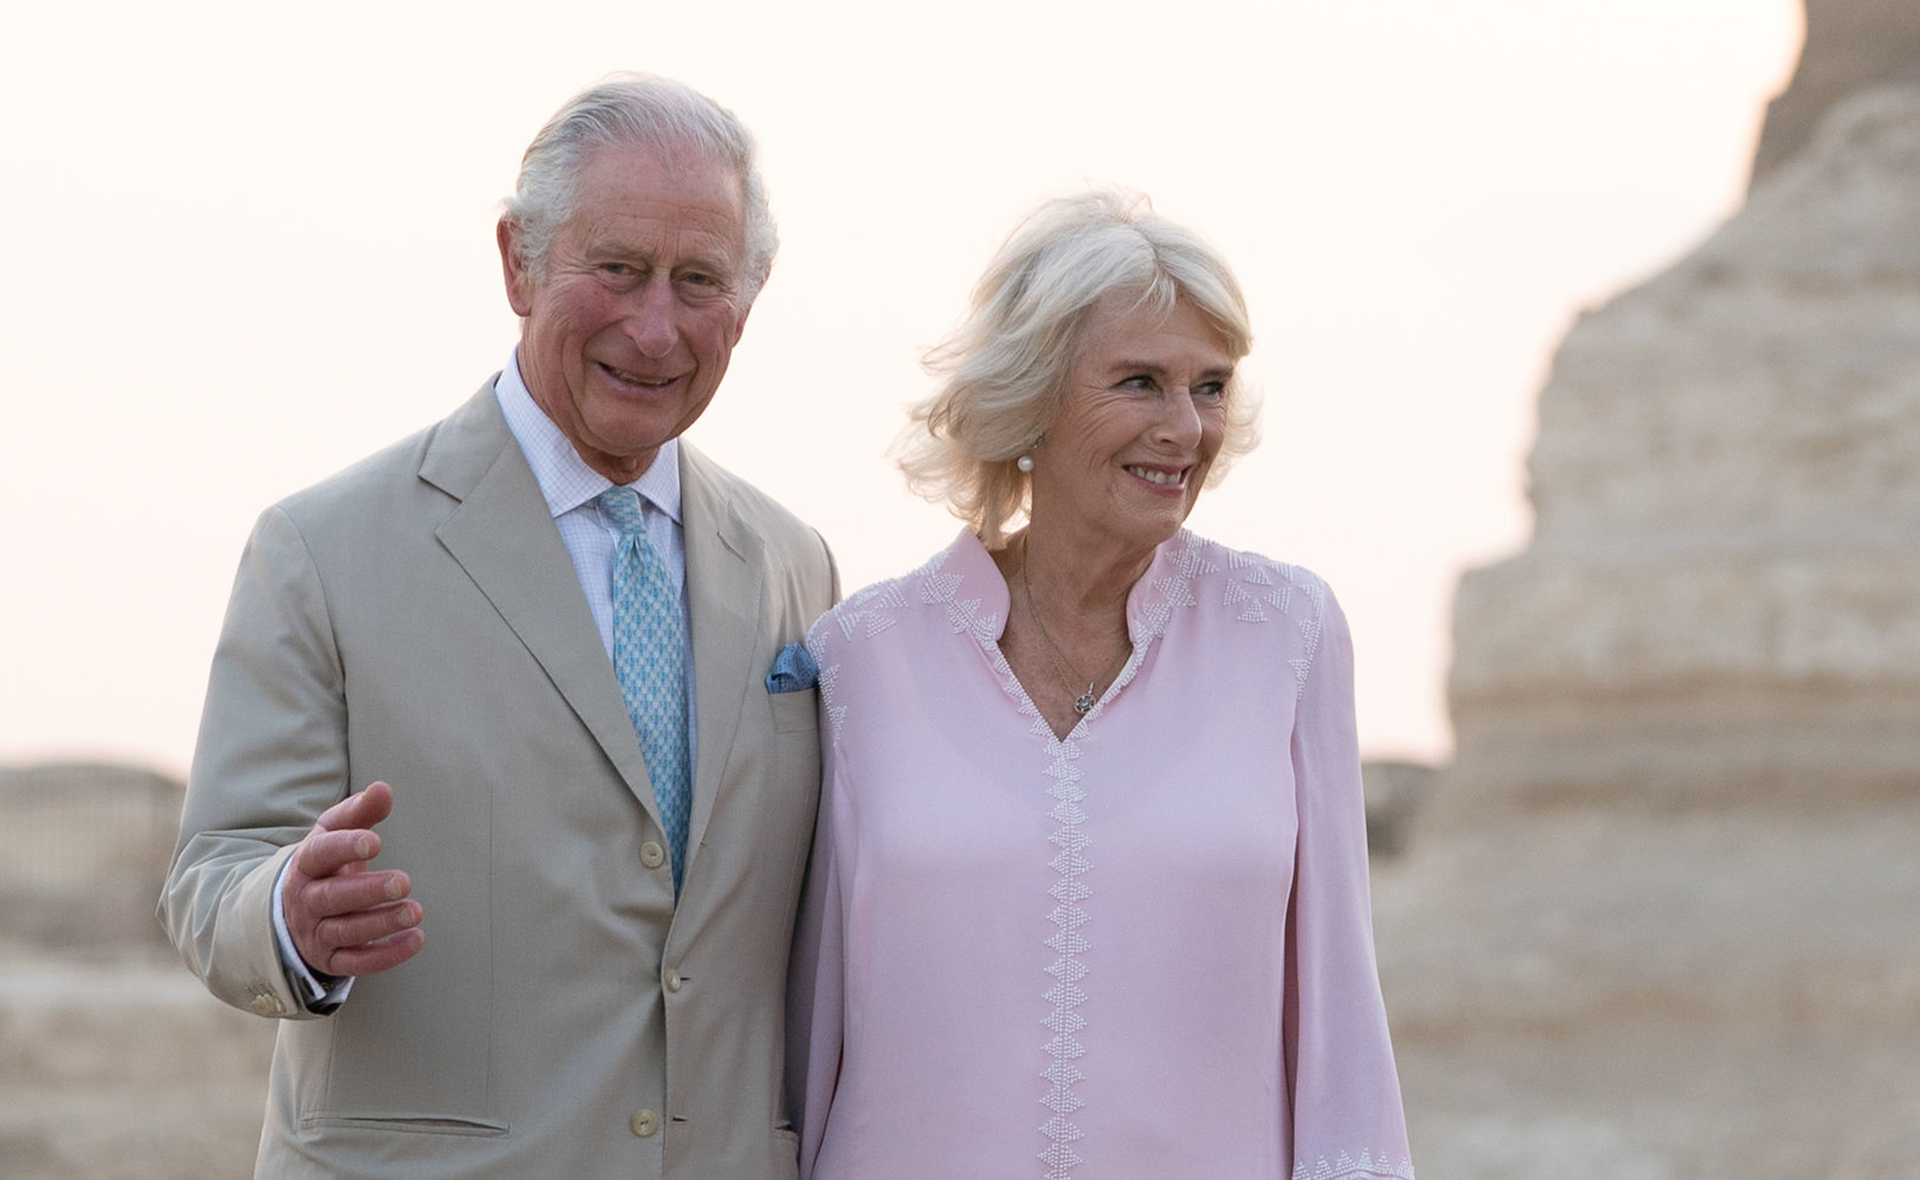 The tender moment caught between Prince Charles and Camilla, Duchess of Cornwall as they visit the pyramids in Egypt